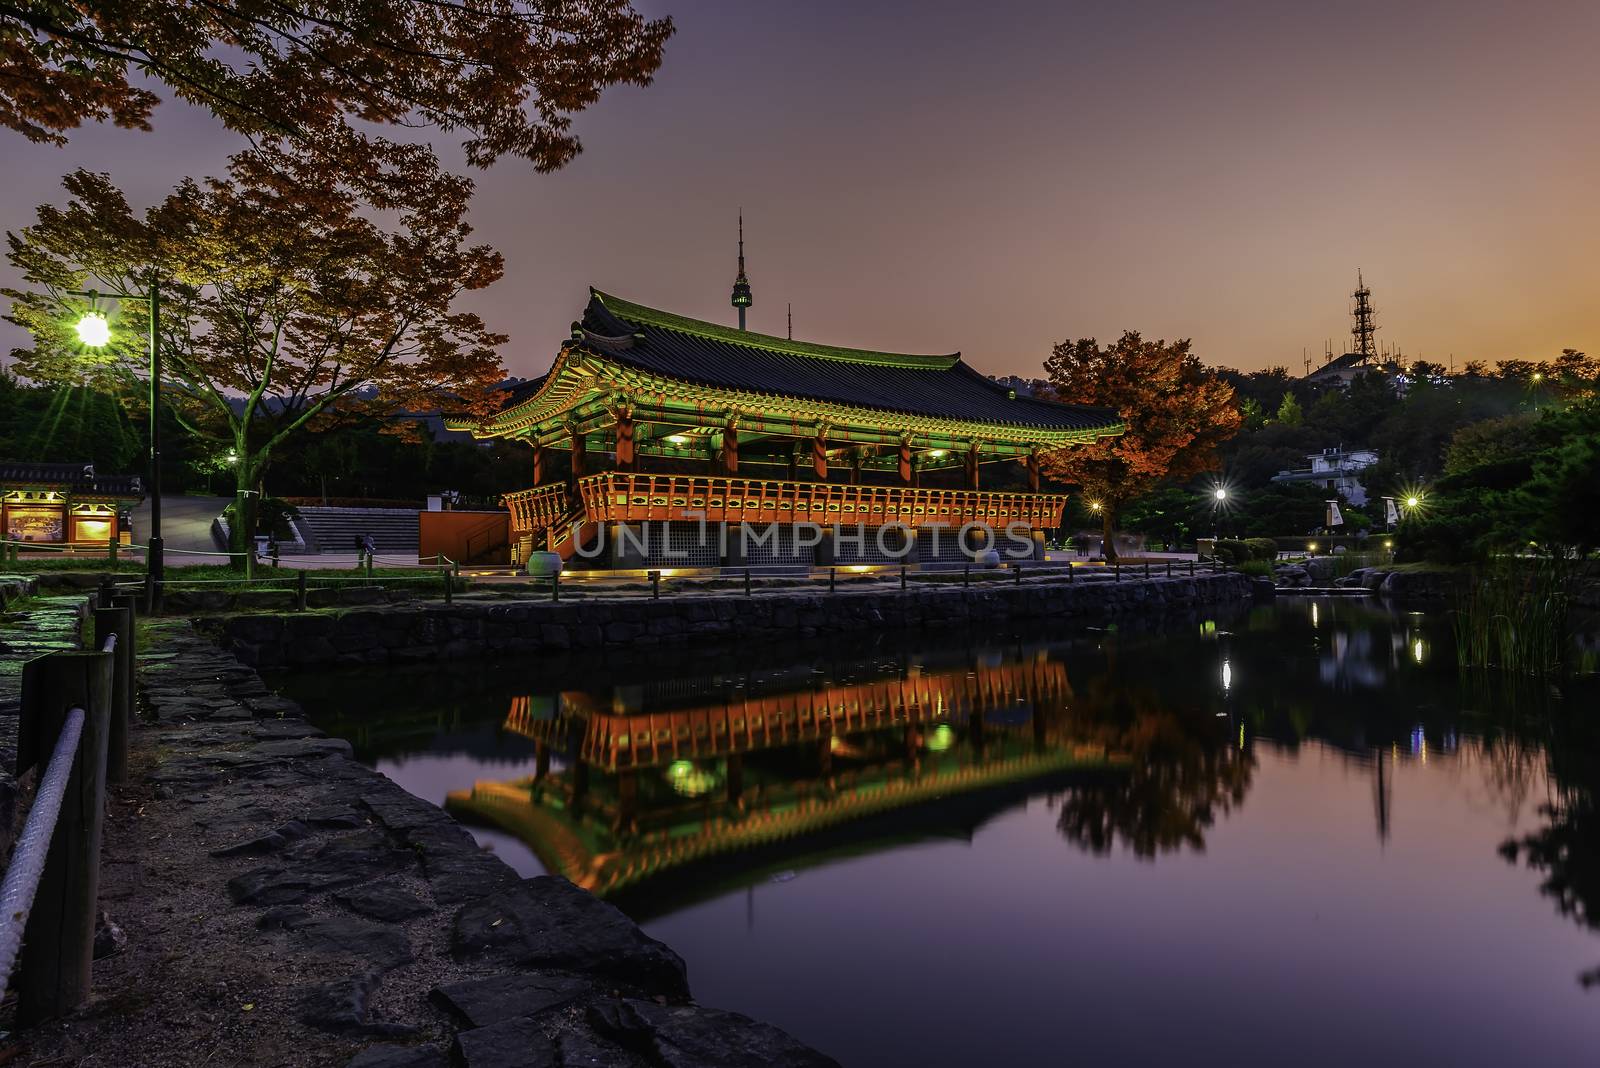 Namsan Tower in an ancient village at the River Pavilion in Seoul, South Korea